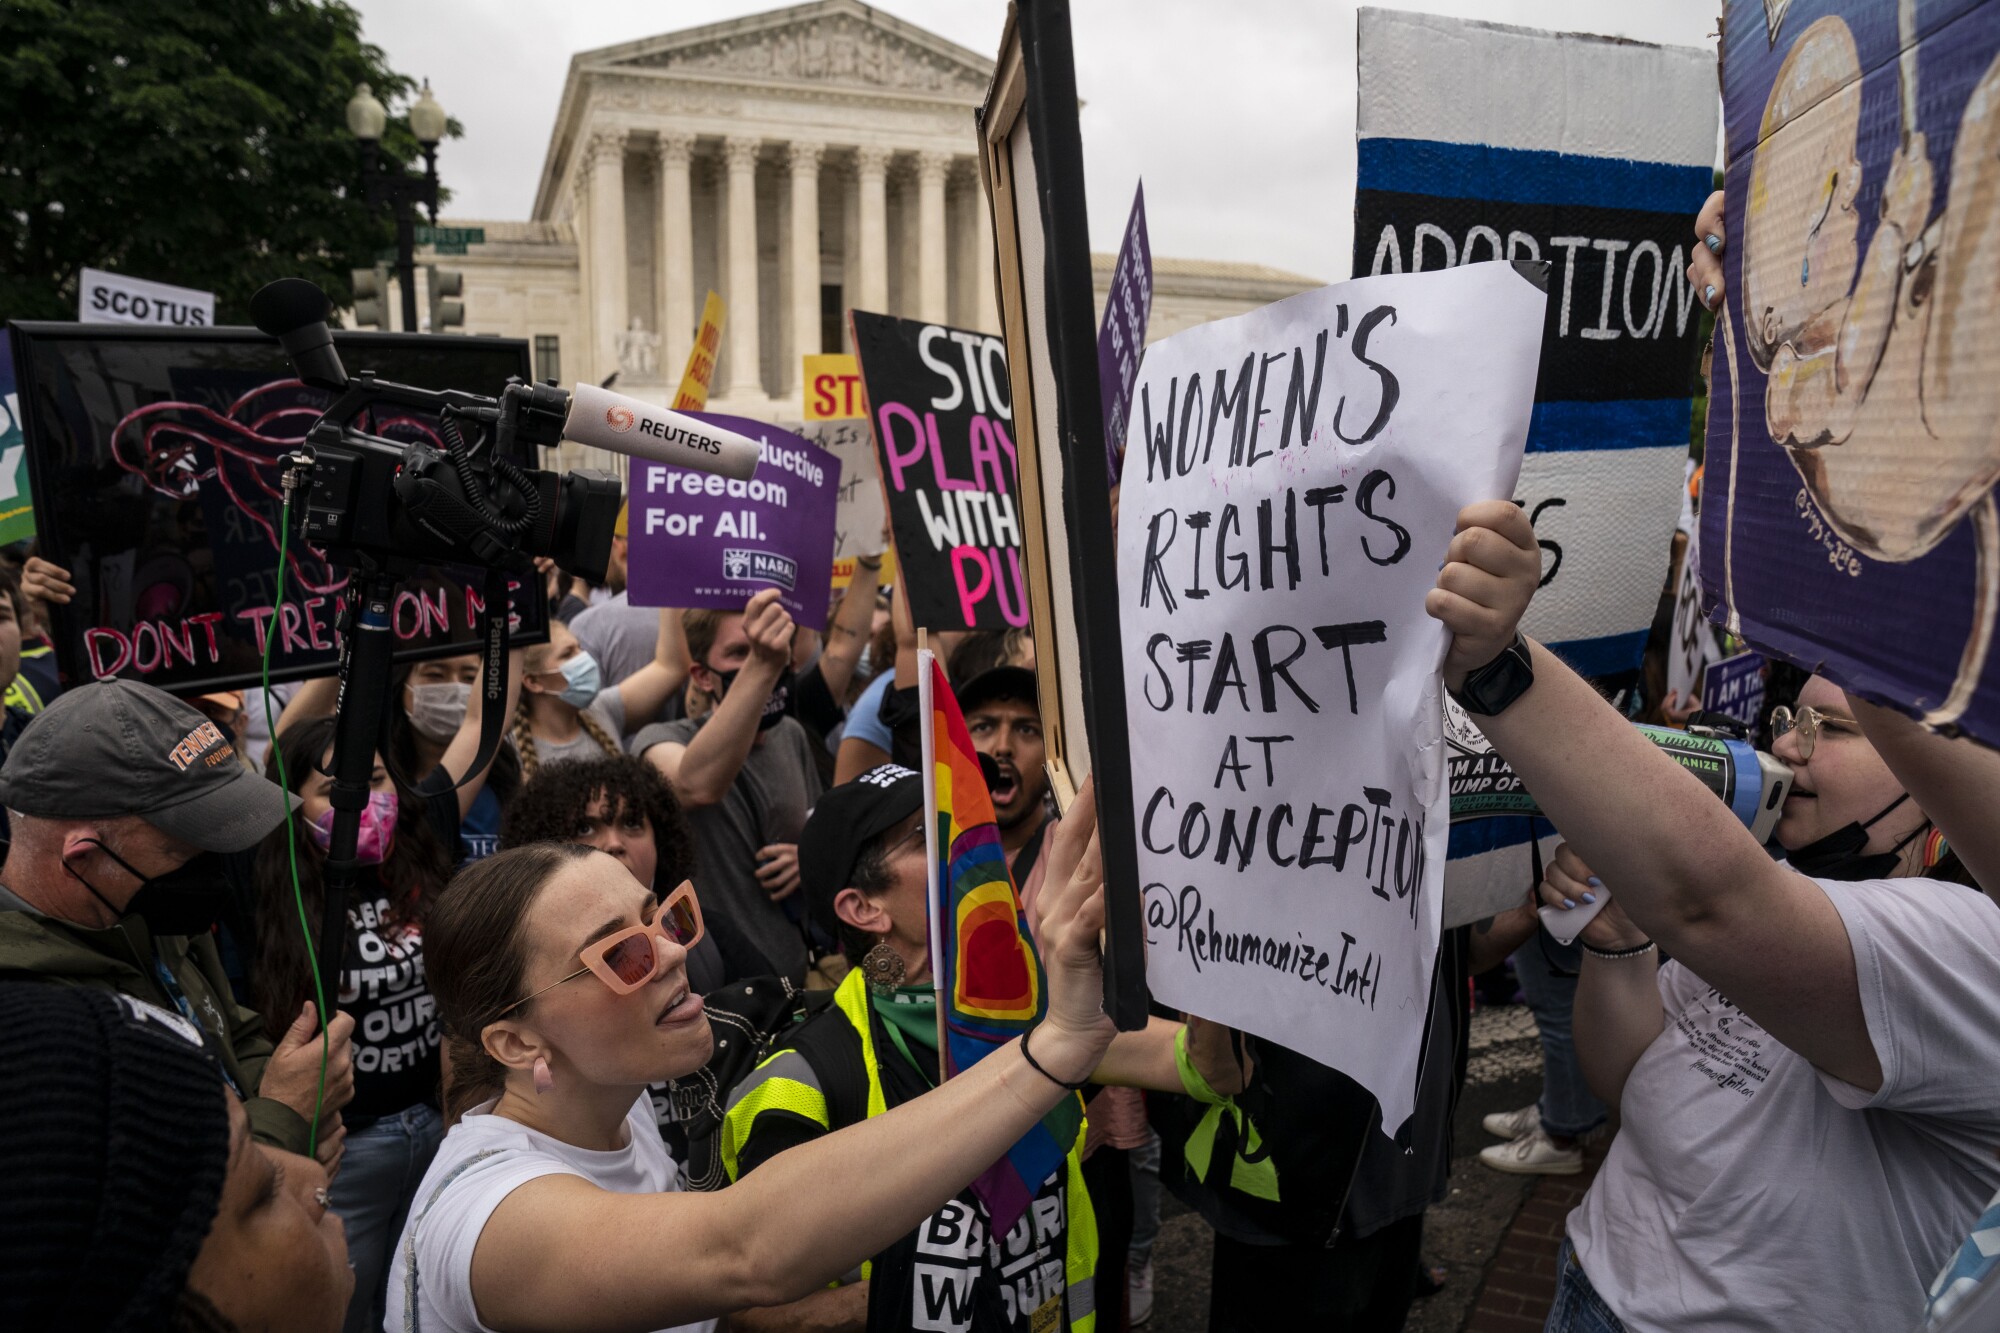 Abortion rights activists and abortion activists yell at each other during a demonstration.